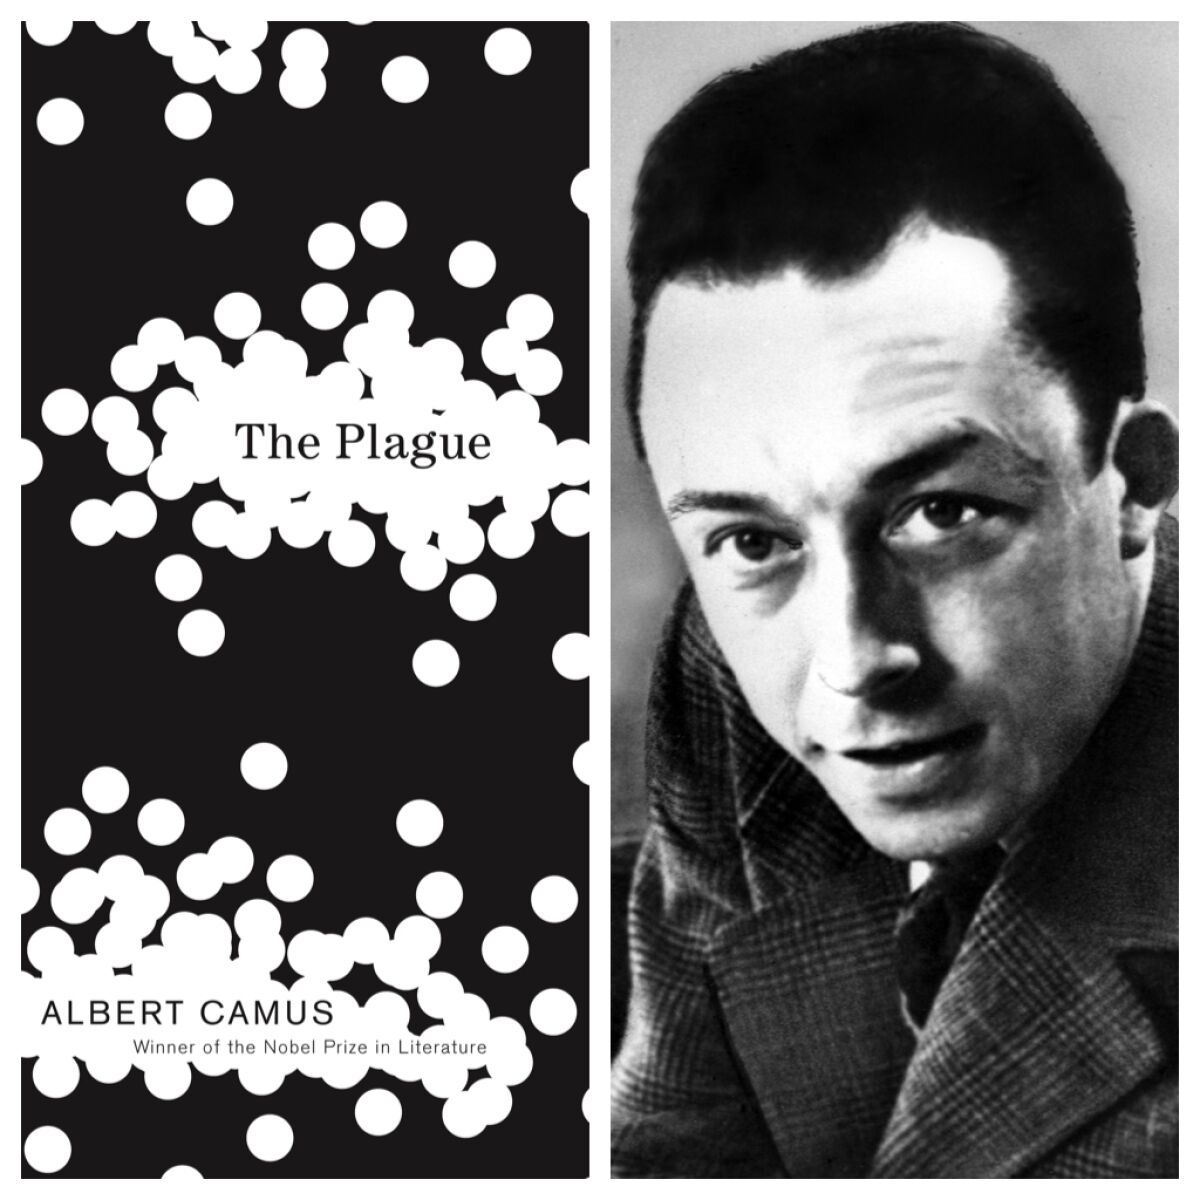 As California was preparing for its first lockdown, Albert Camus’ “The Plague” was flying off the shelves of local stores.